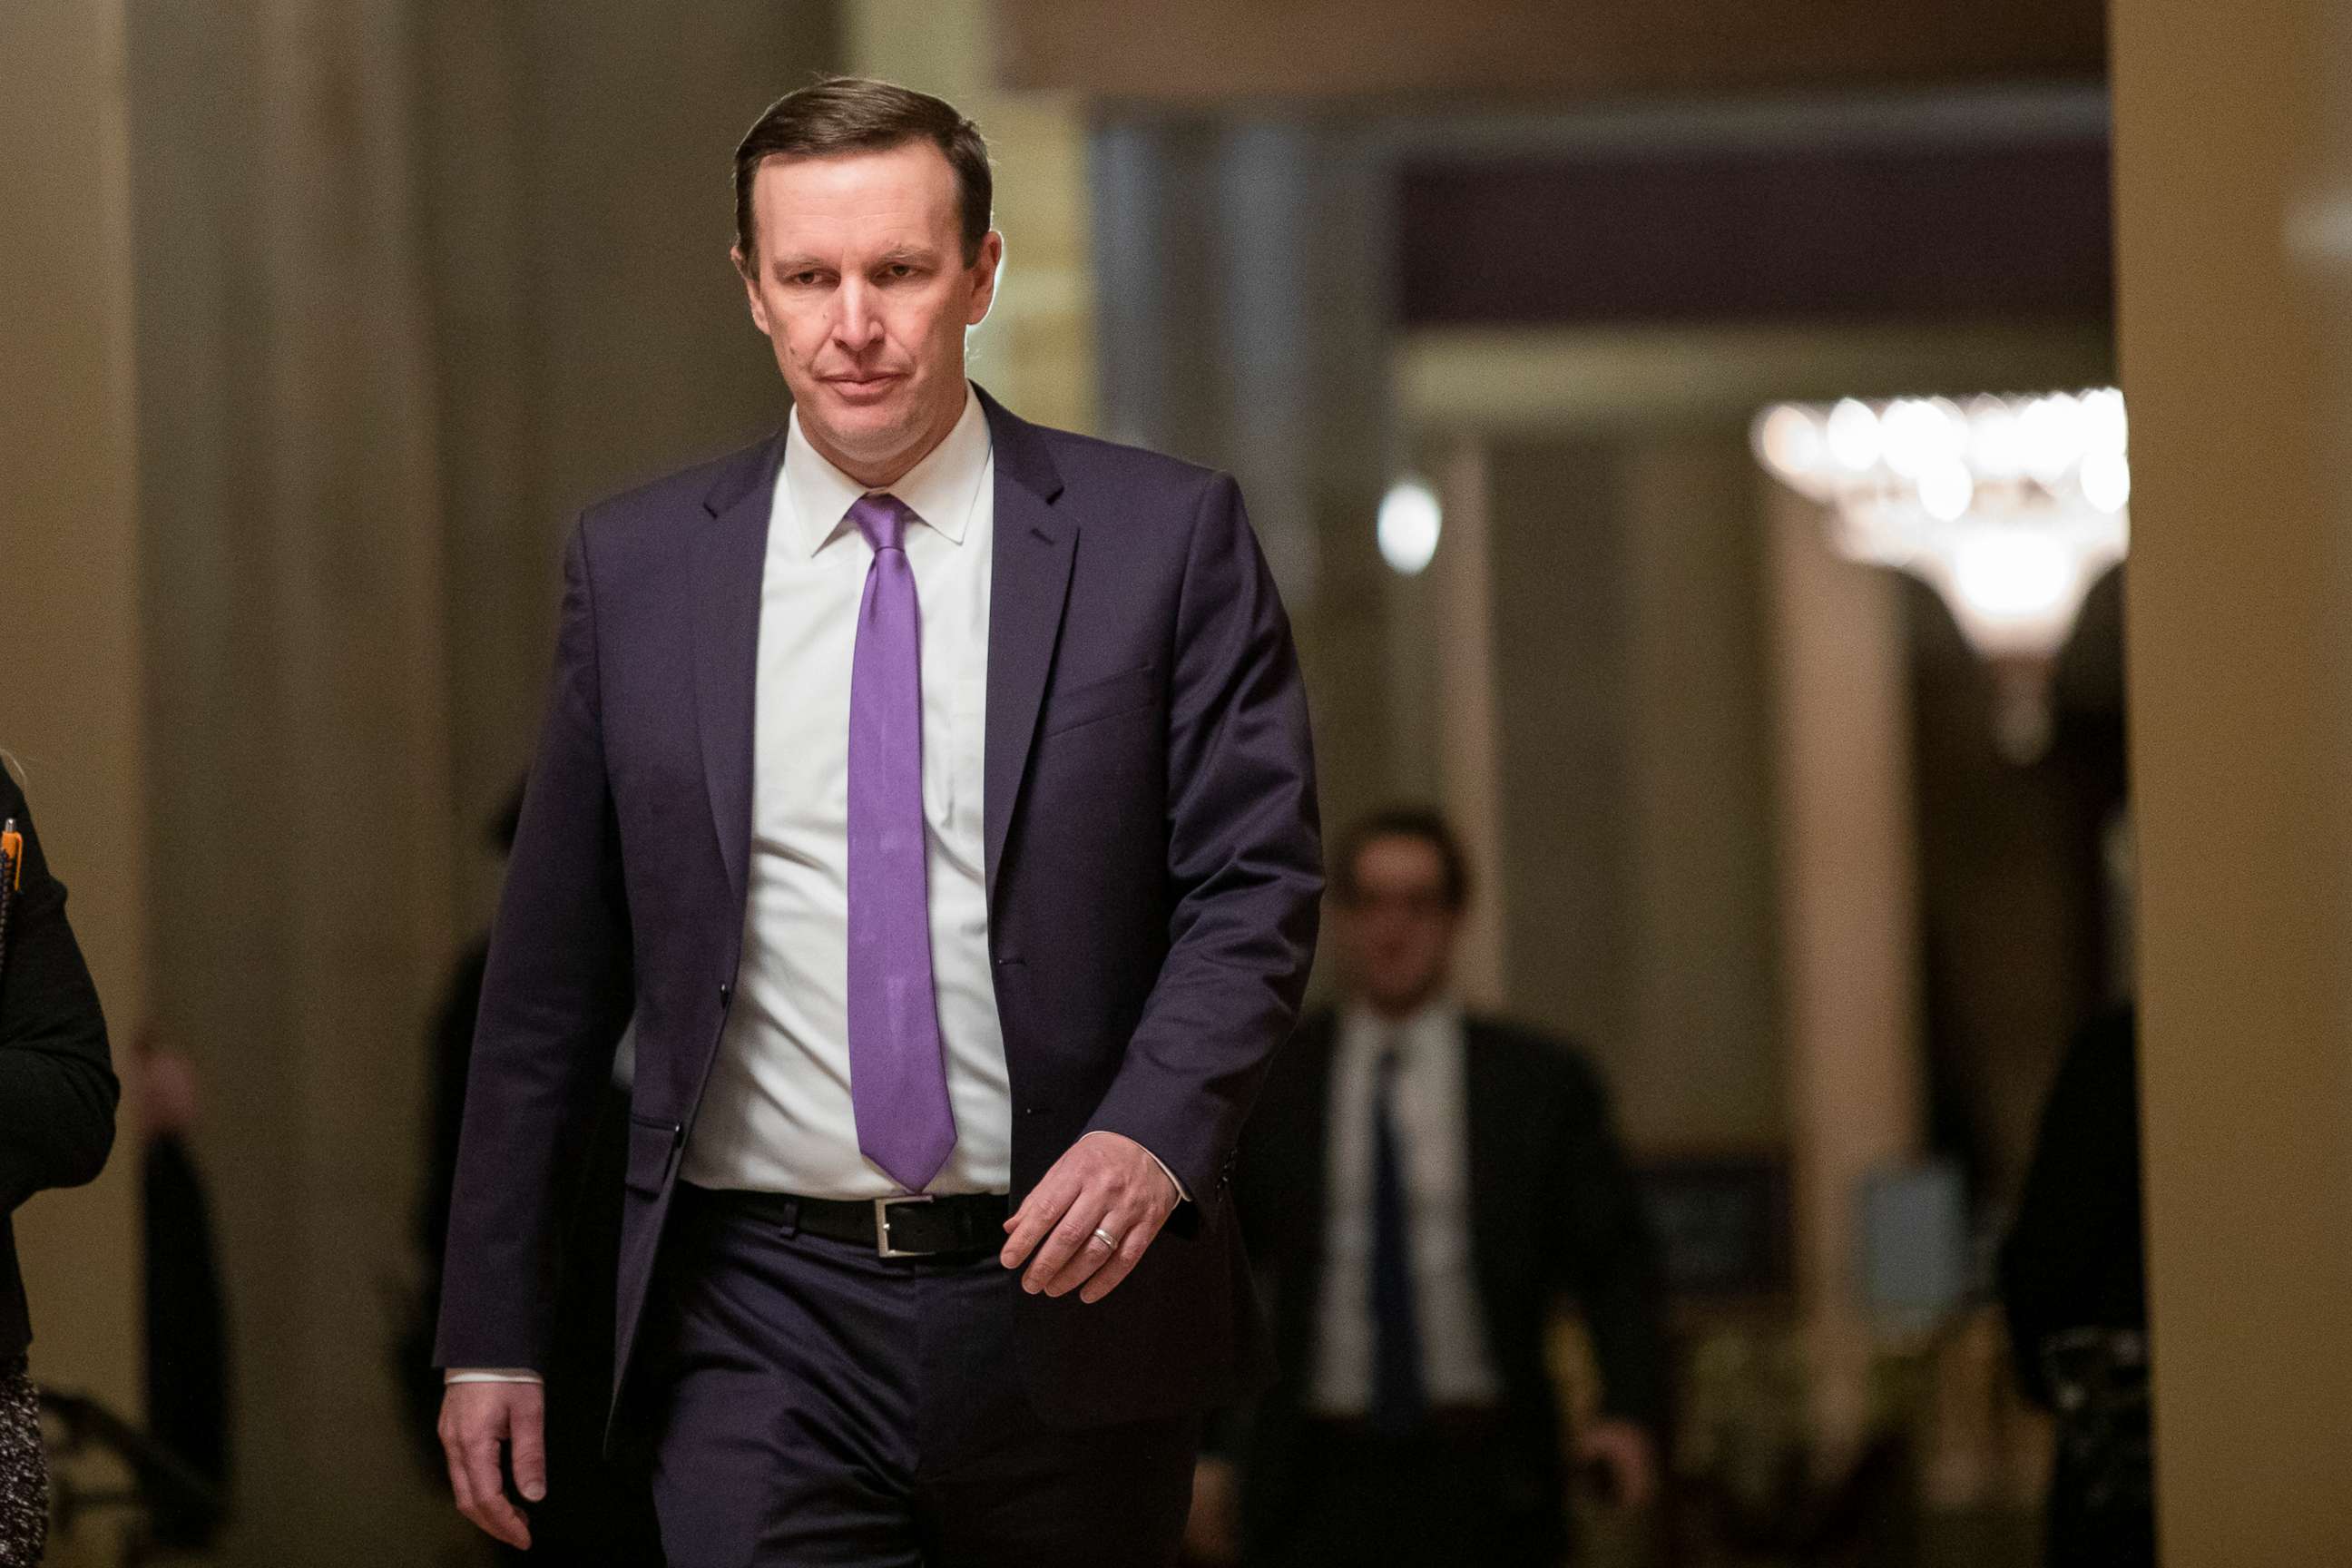 PHOTO: In this Jan. 29, 2020, file photo, Sen. Chris Murphy returns to the Senate floor following a recess in the Senate impeachment trial in Washington, DC.